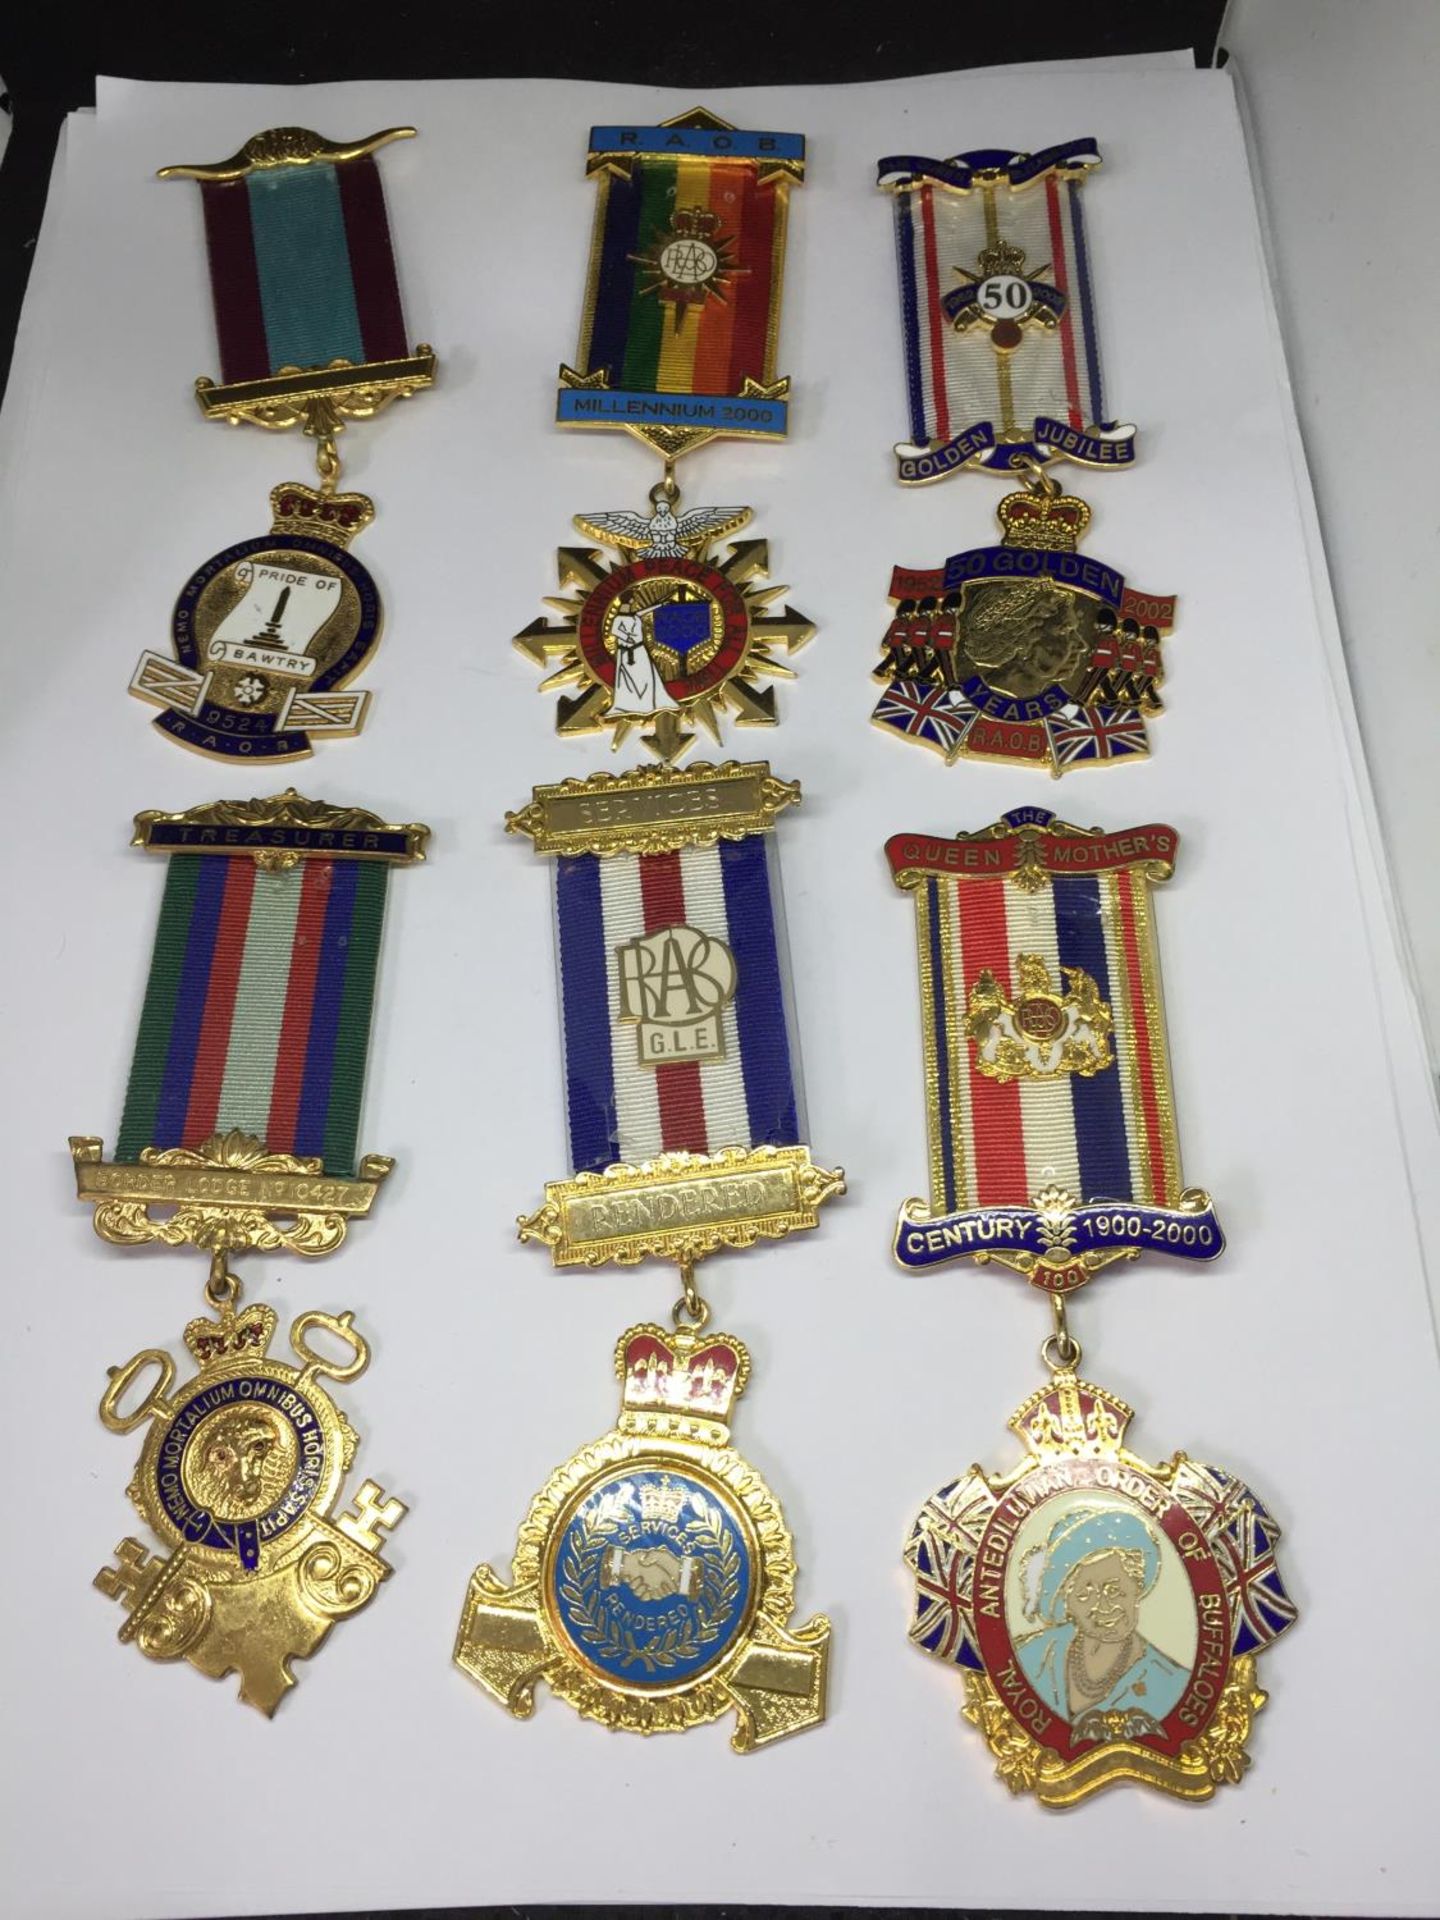 SIX ORDER OF THE BUFFALOS MEDALS